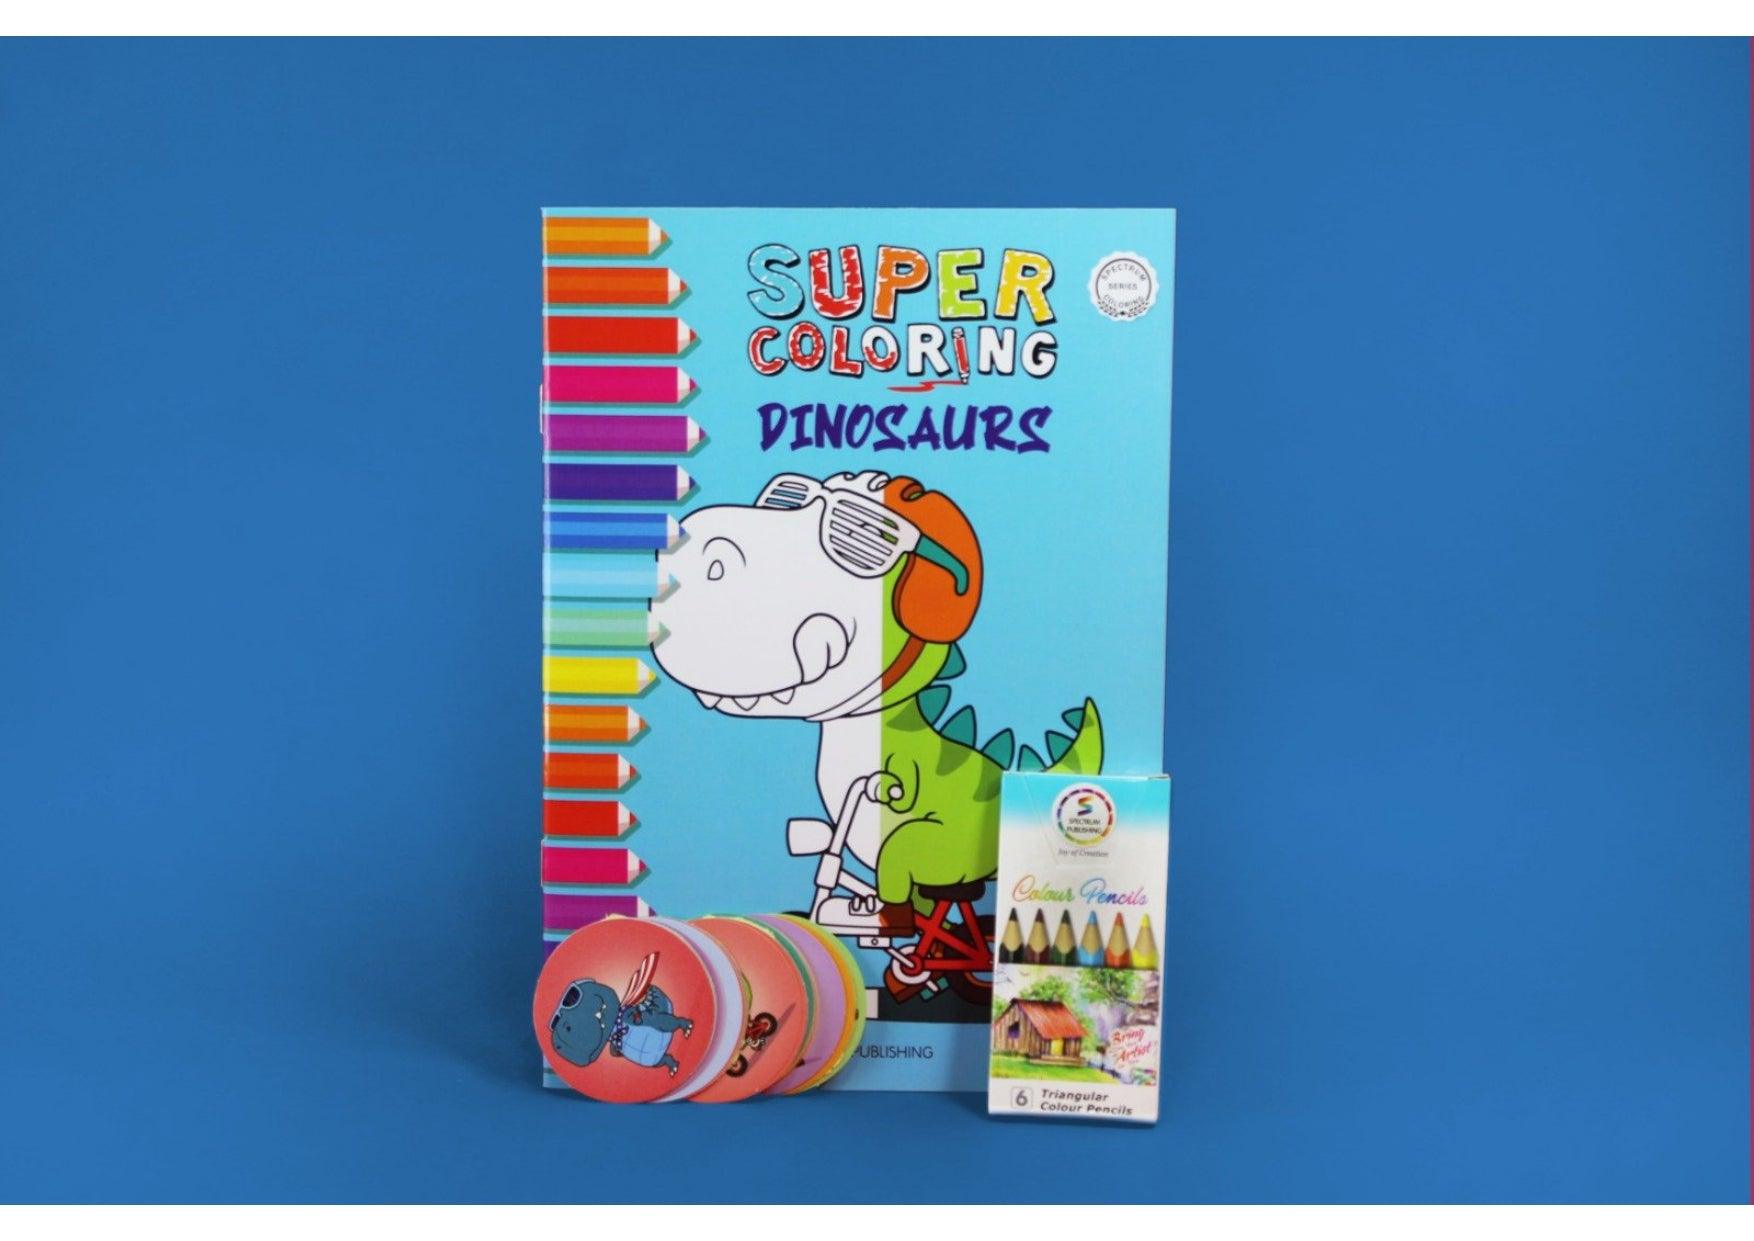 Super coloring dinosaurs book - Ourkids - Spectrum Publishing